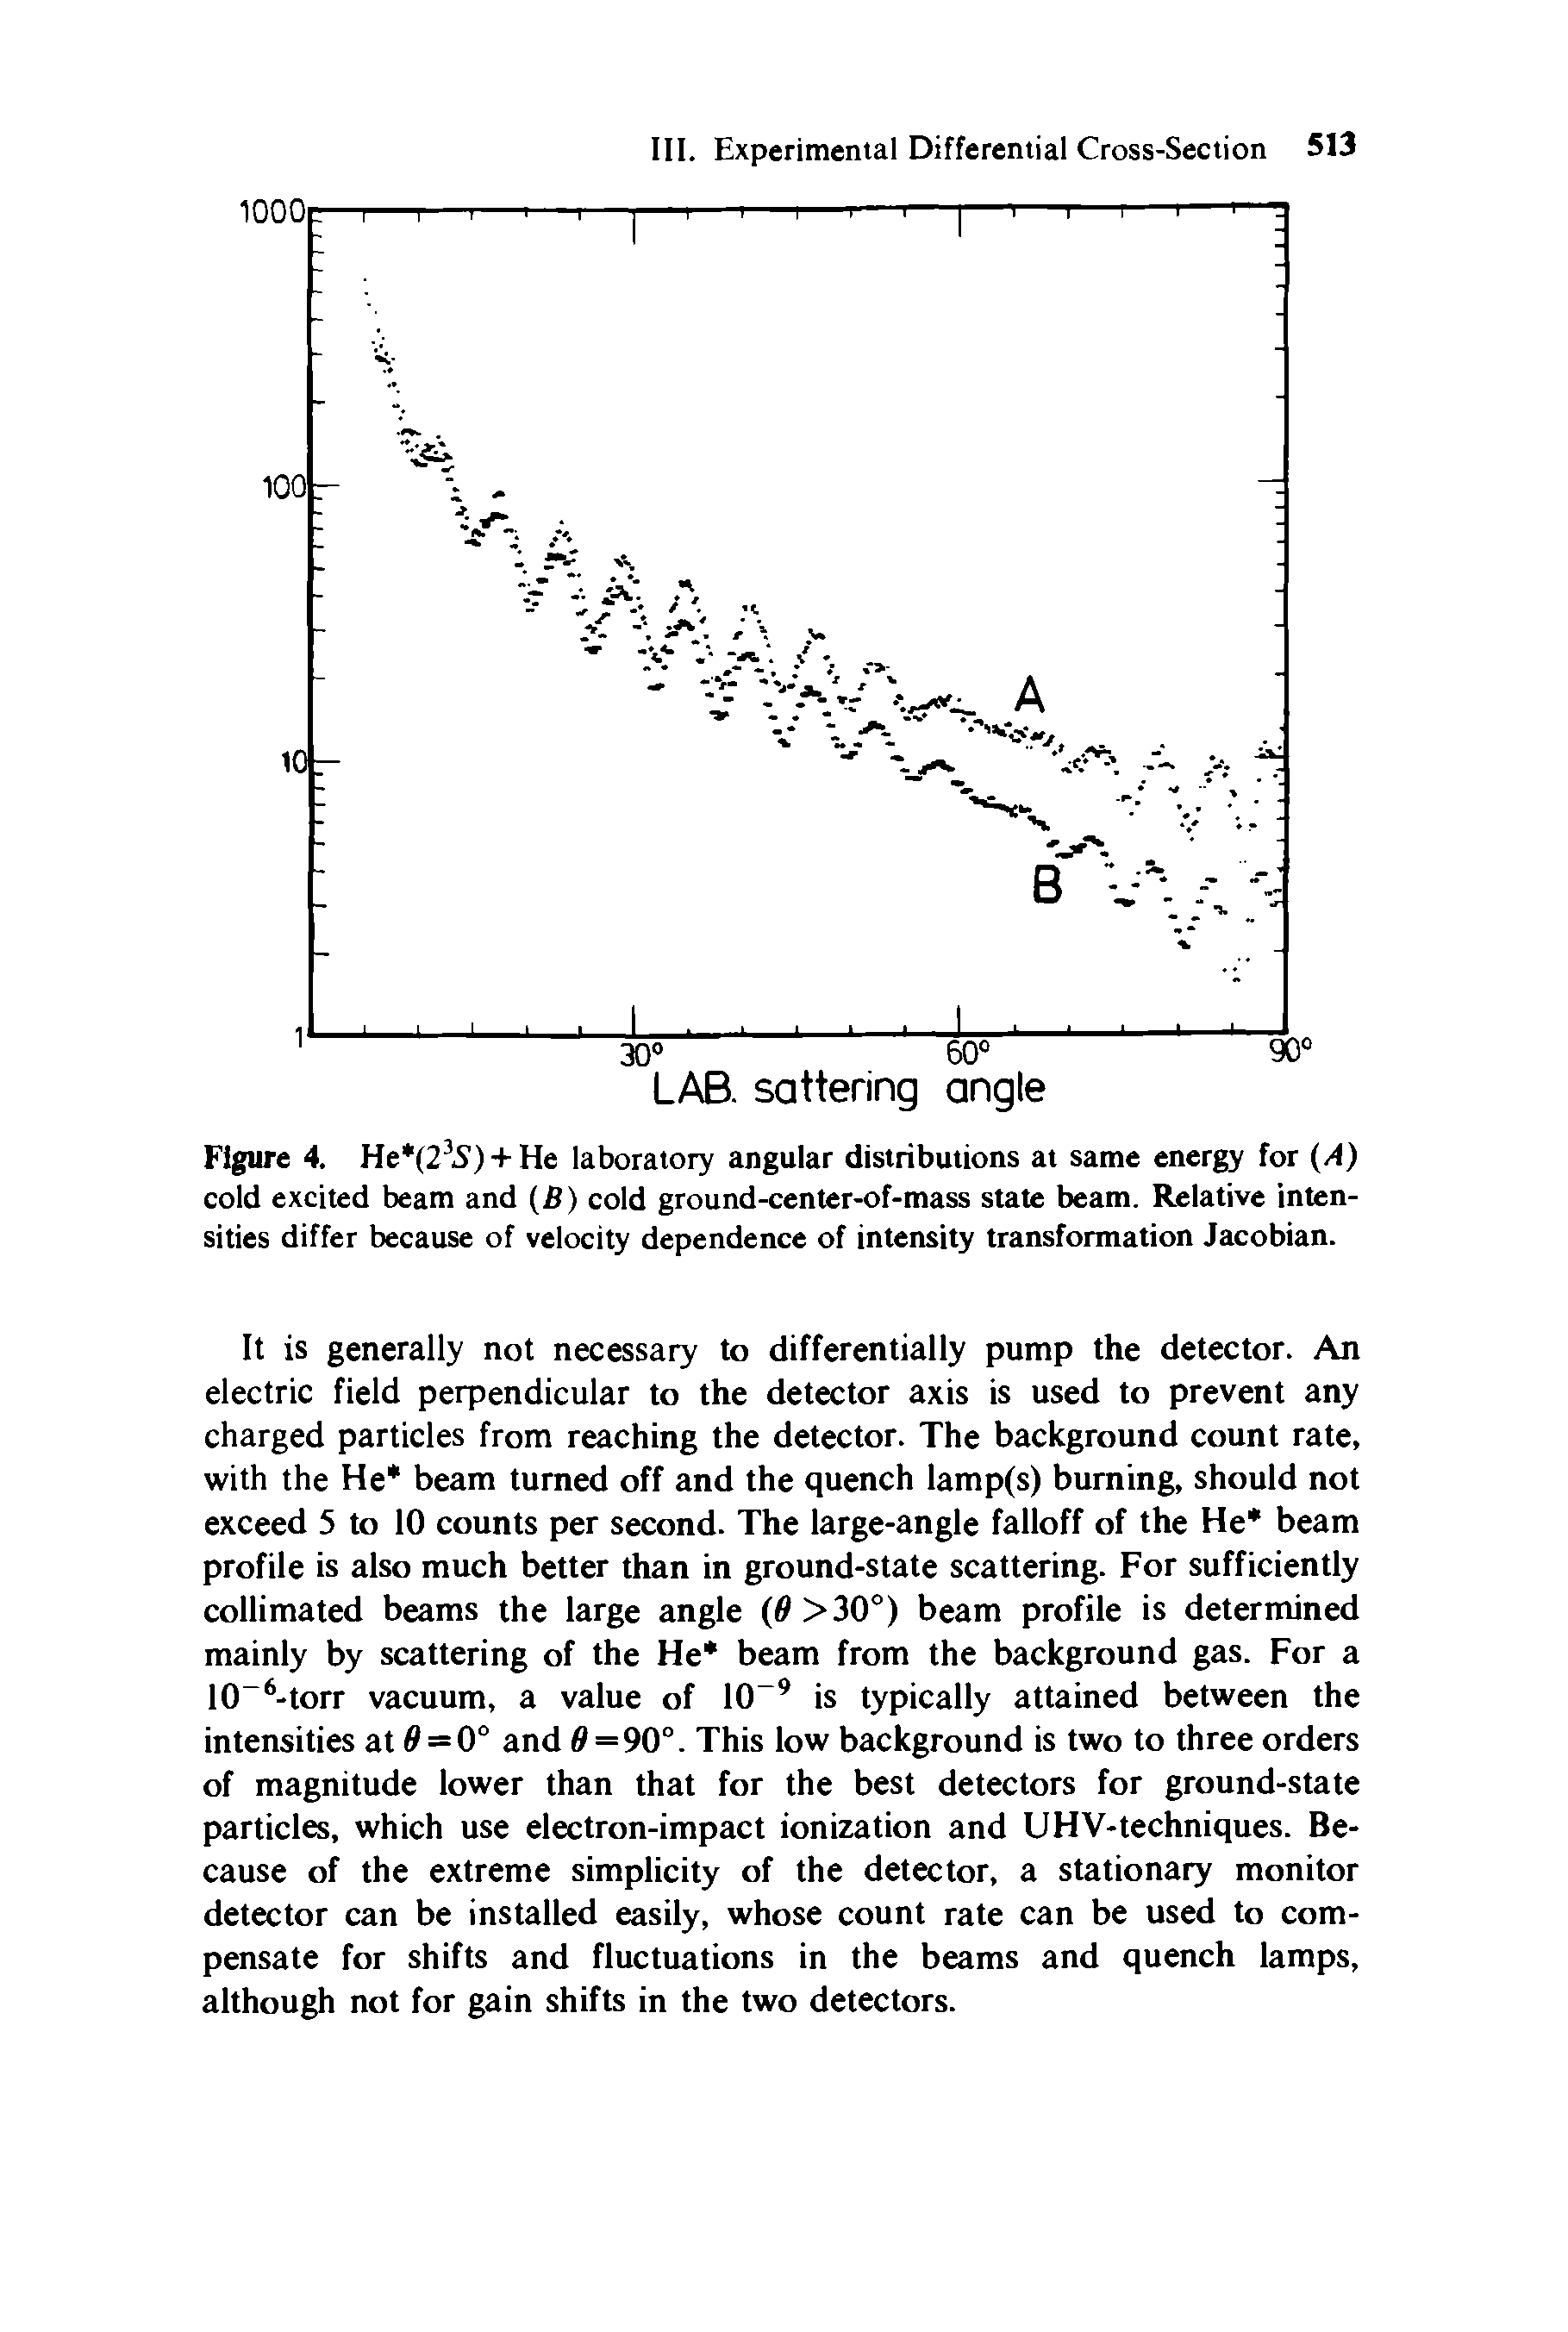 Figure 4. He (23S) + He laboratory angular distributions at same energy for (A) cold excited beam and (B) cold ground-center-of-mass state beam. Relative intensities differ because of velocity dependence of intensity transformation Jacobian.